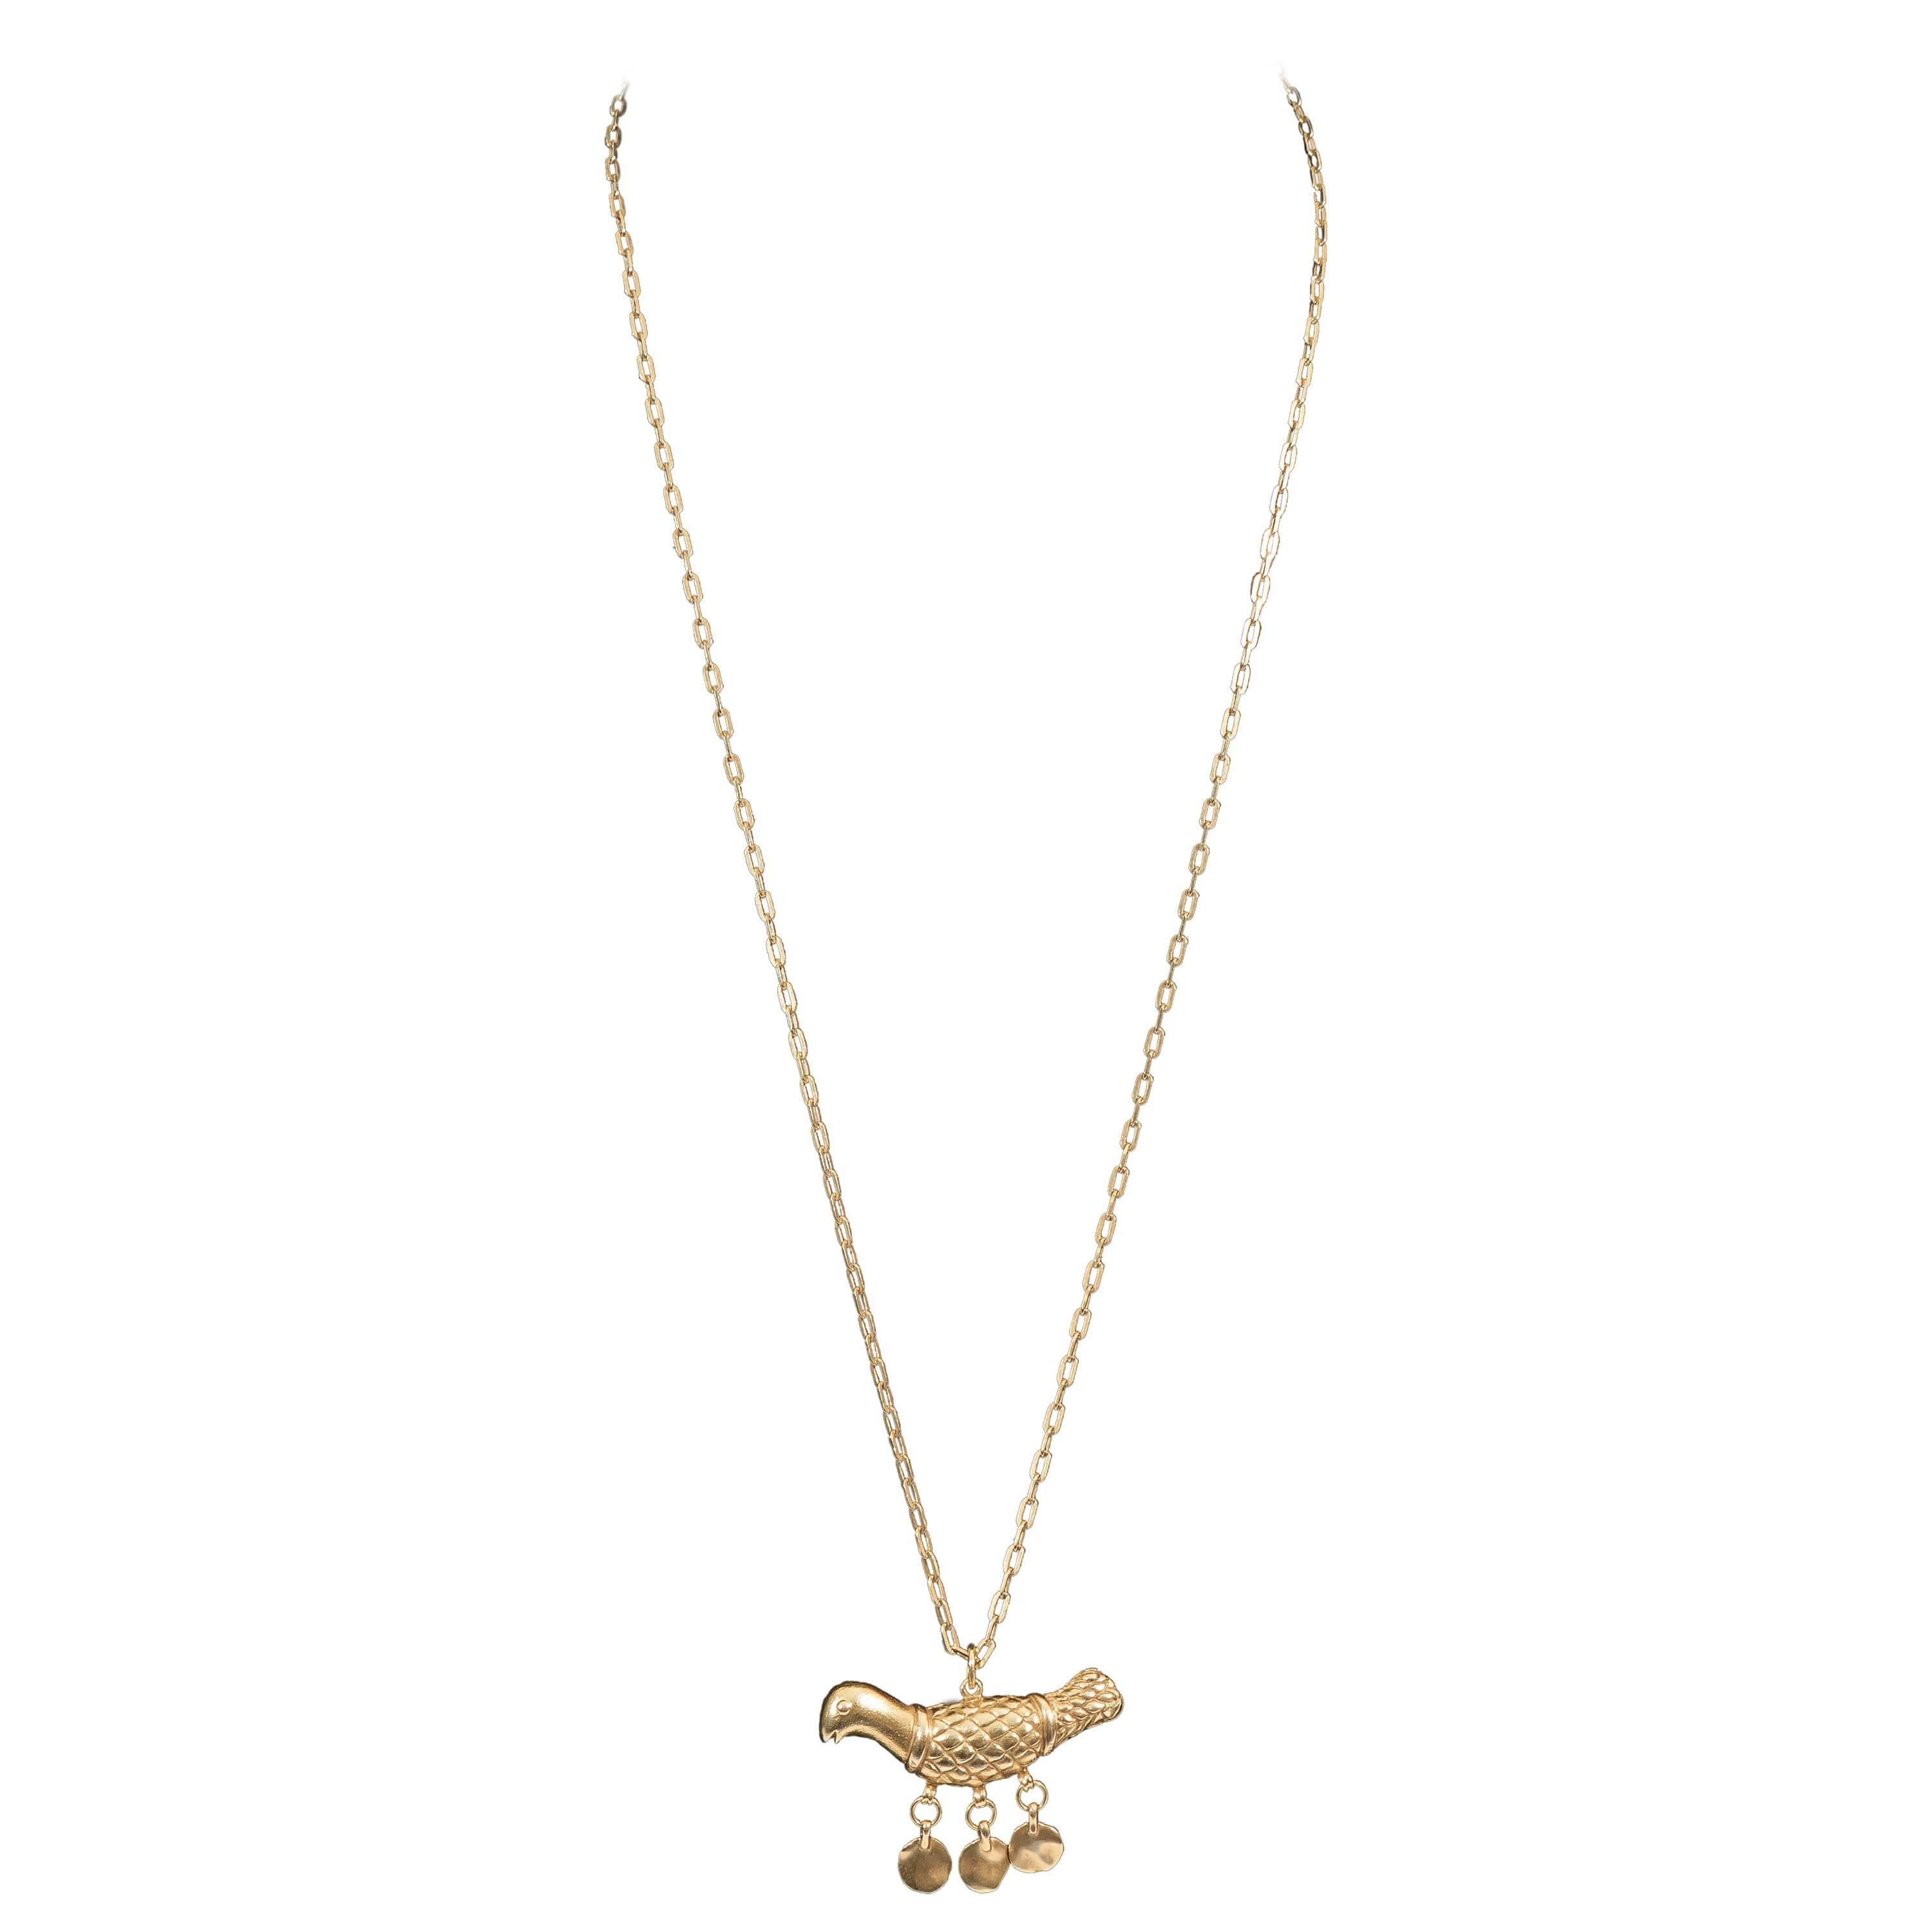 Tiffany & Co. Bird Pendant Necklace in 18k Yellow Gold